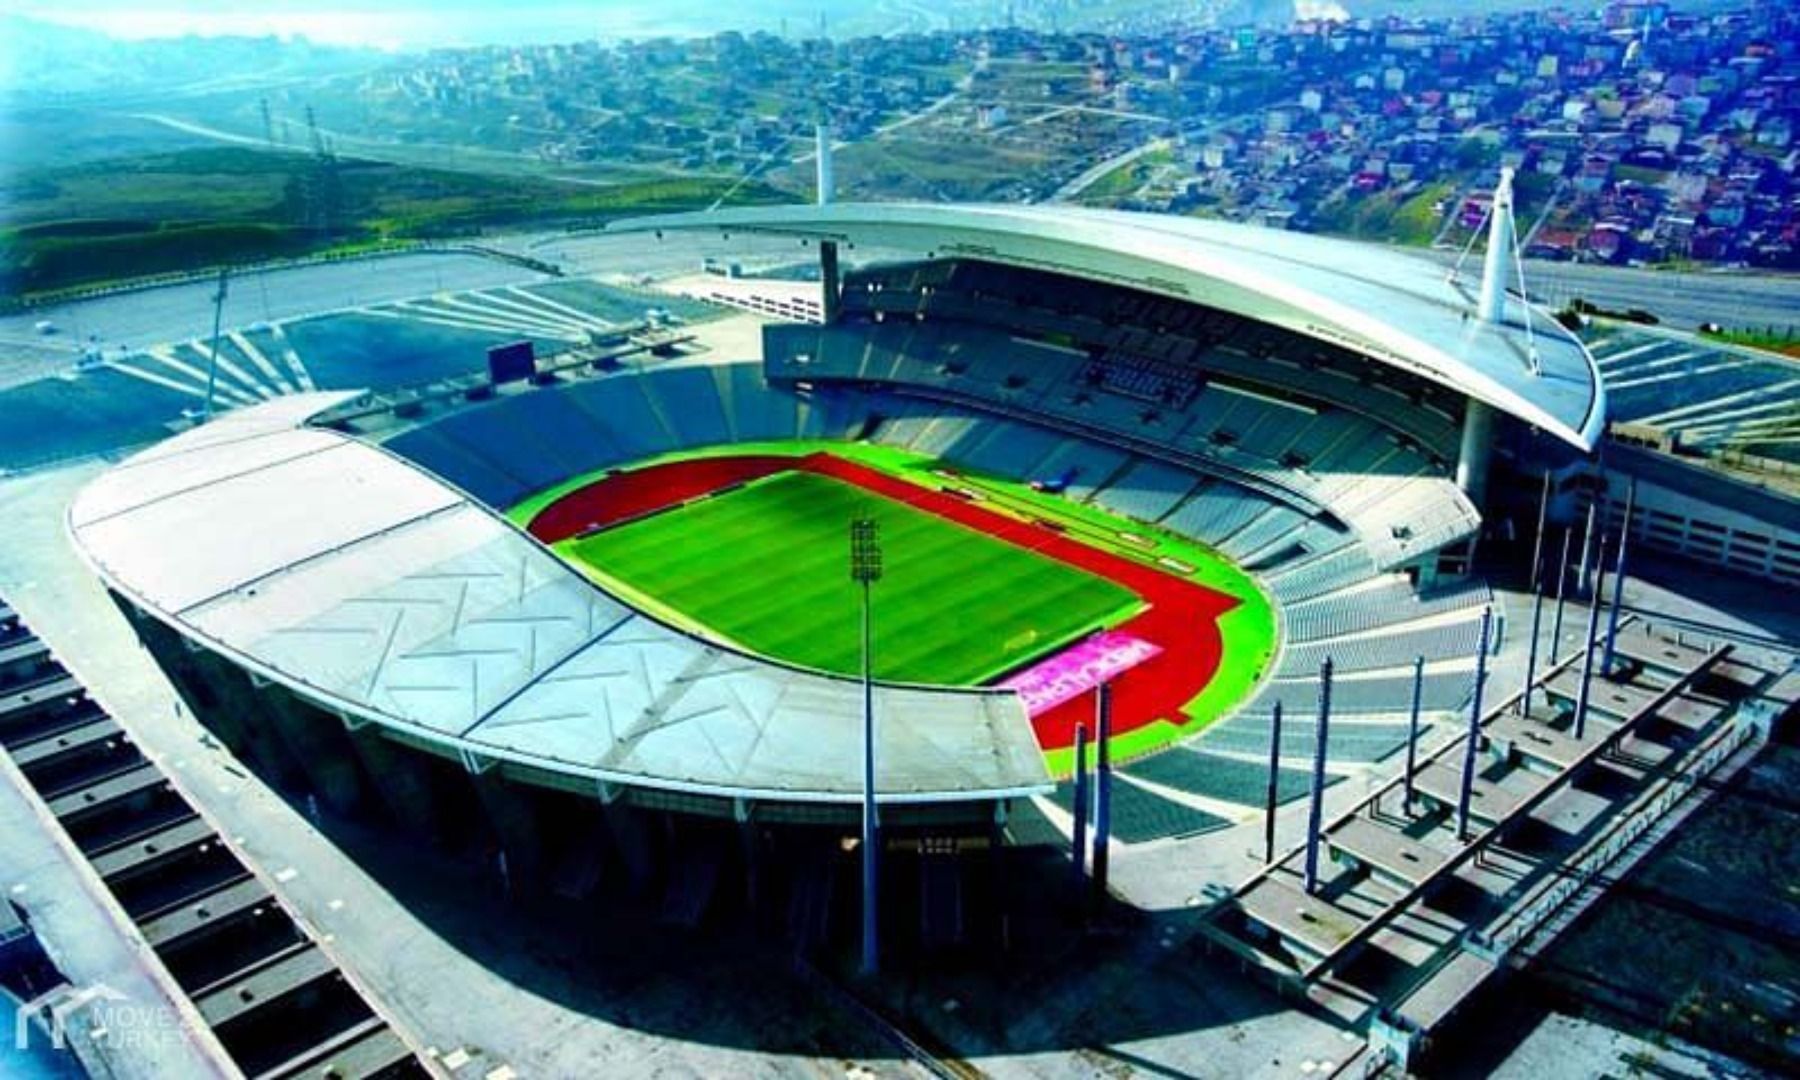 Home of the 2021 Champions League final, the Ataturk Stadium is an architectural marvel.